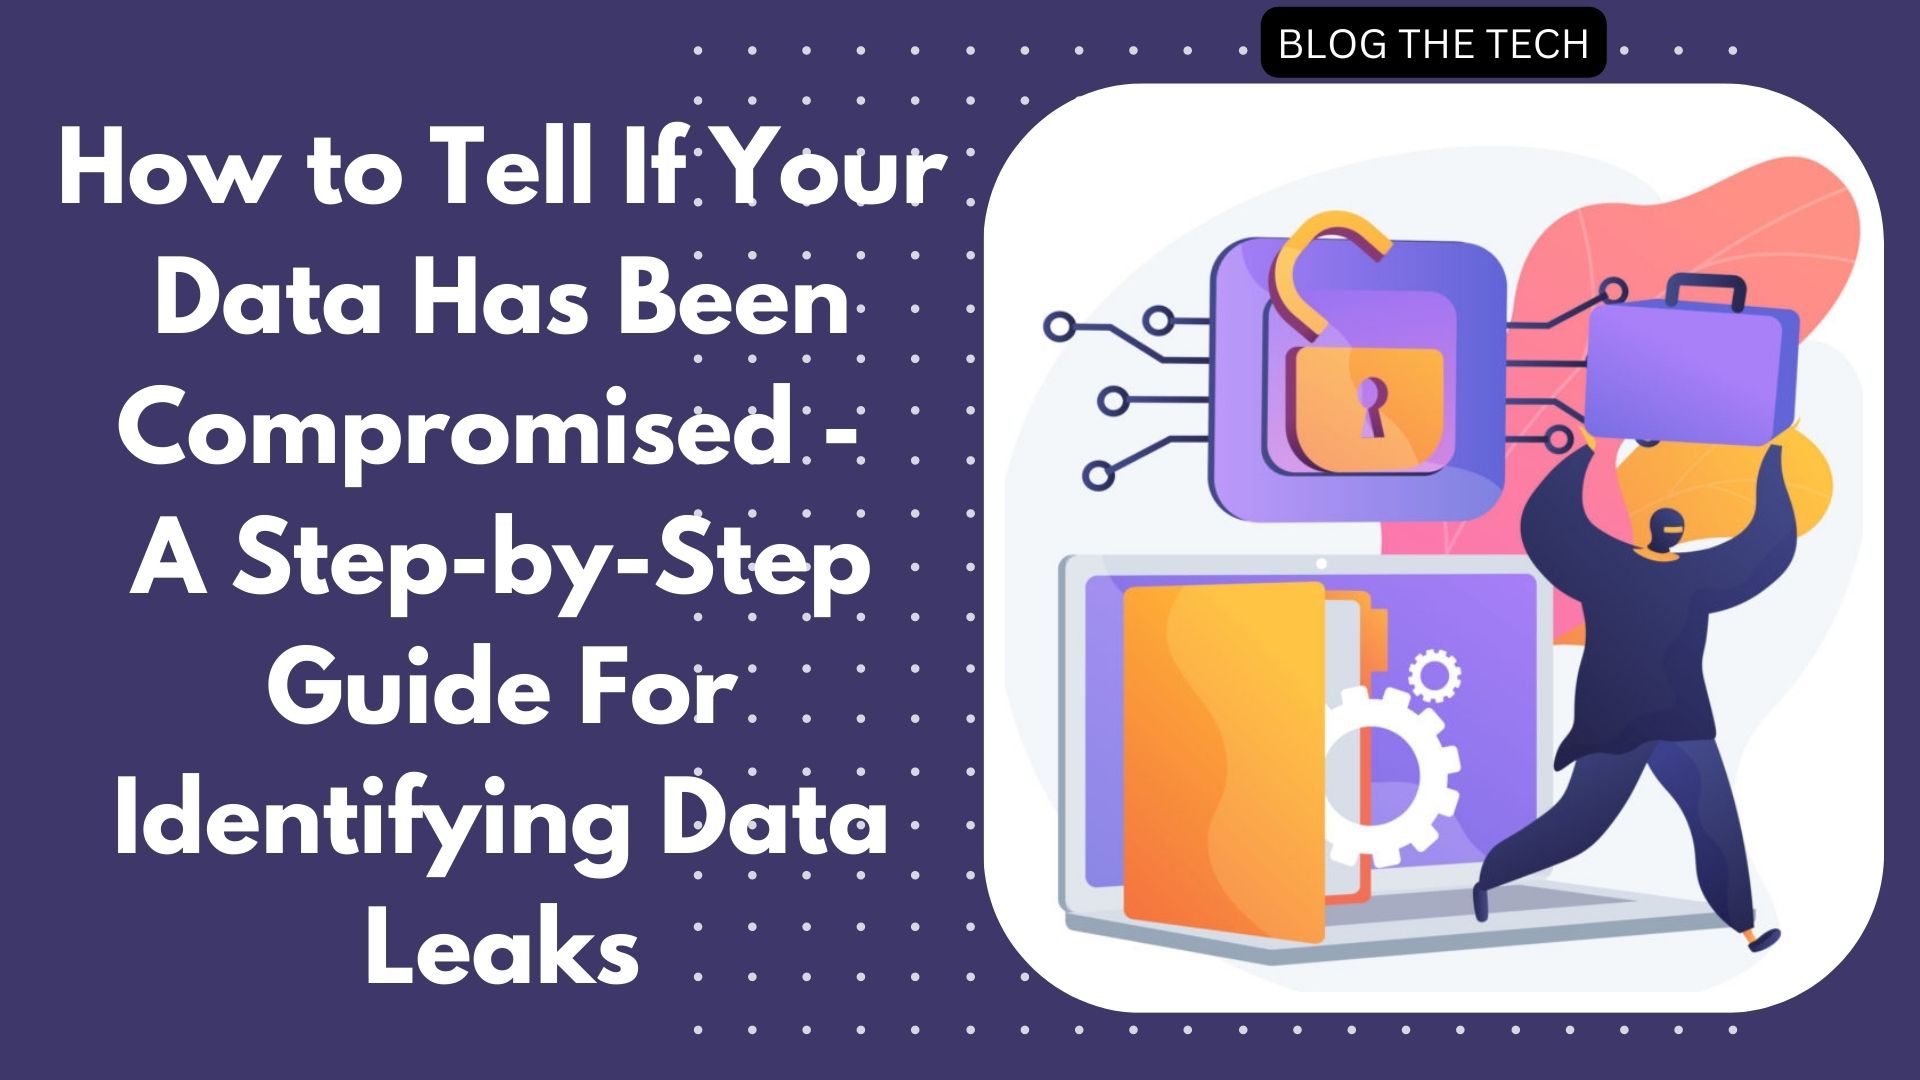 How to Tell If Your Data Has Been Compromised - A Step-by-Step Guide For Identifying Data Leaks